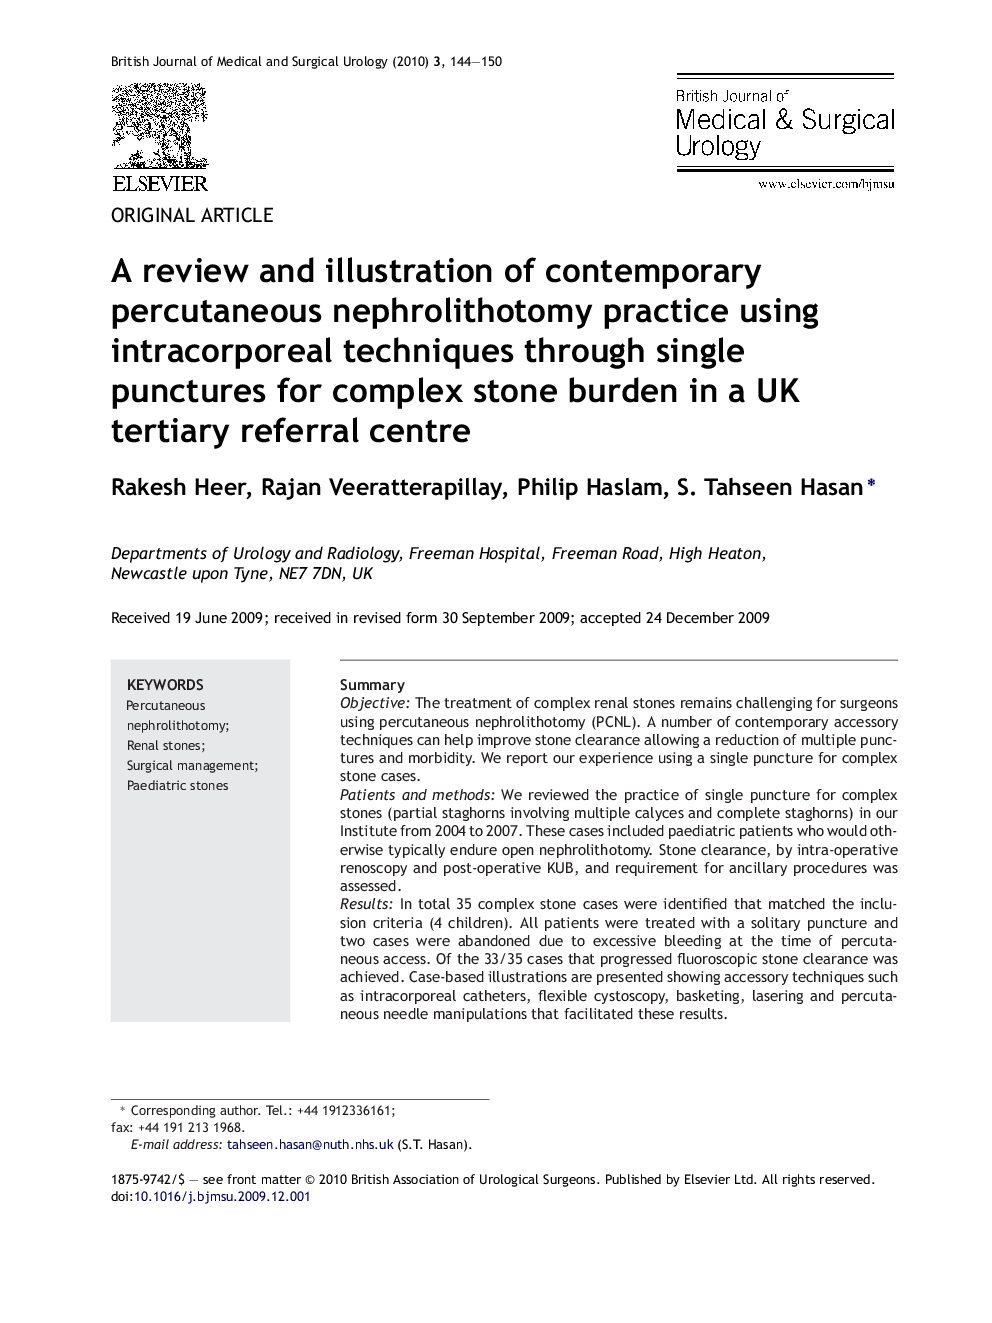 A review and illustration of contemporary percutaneous nephrolithotomy practice using intracorporeal techniques through single punctures for complex stone burden in a UK tertiary referral centre